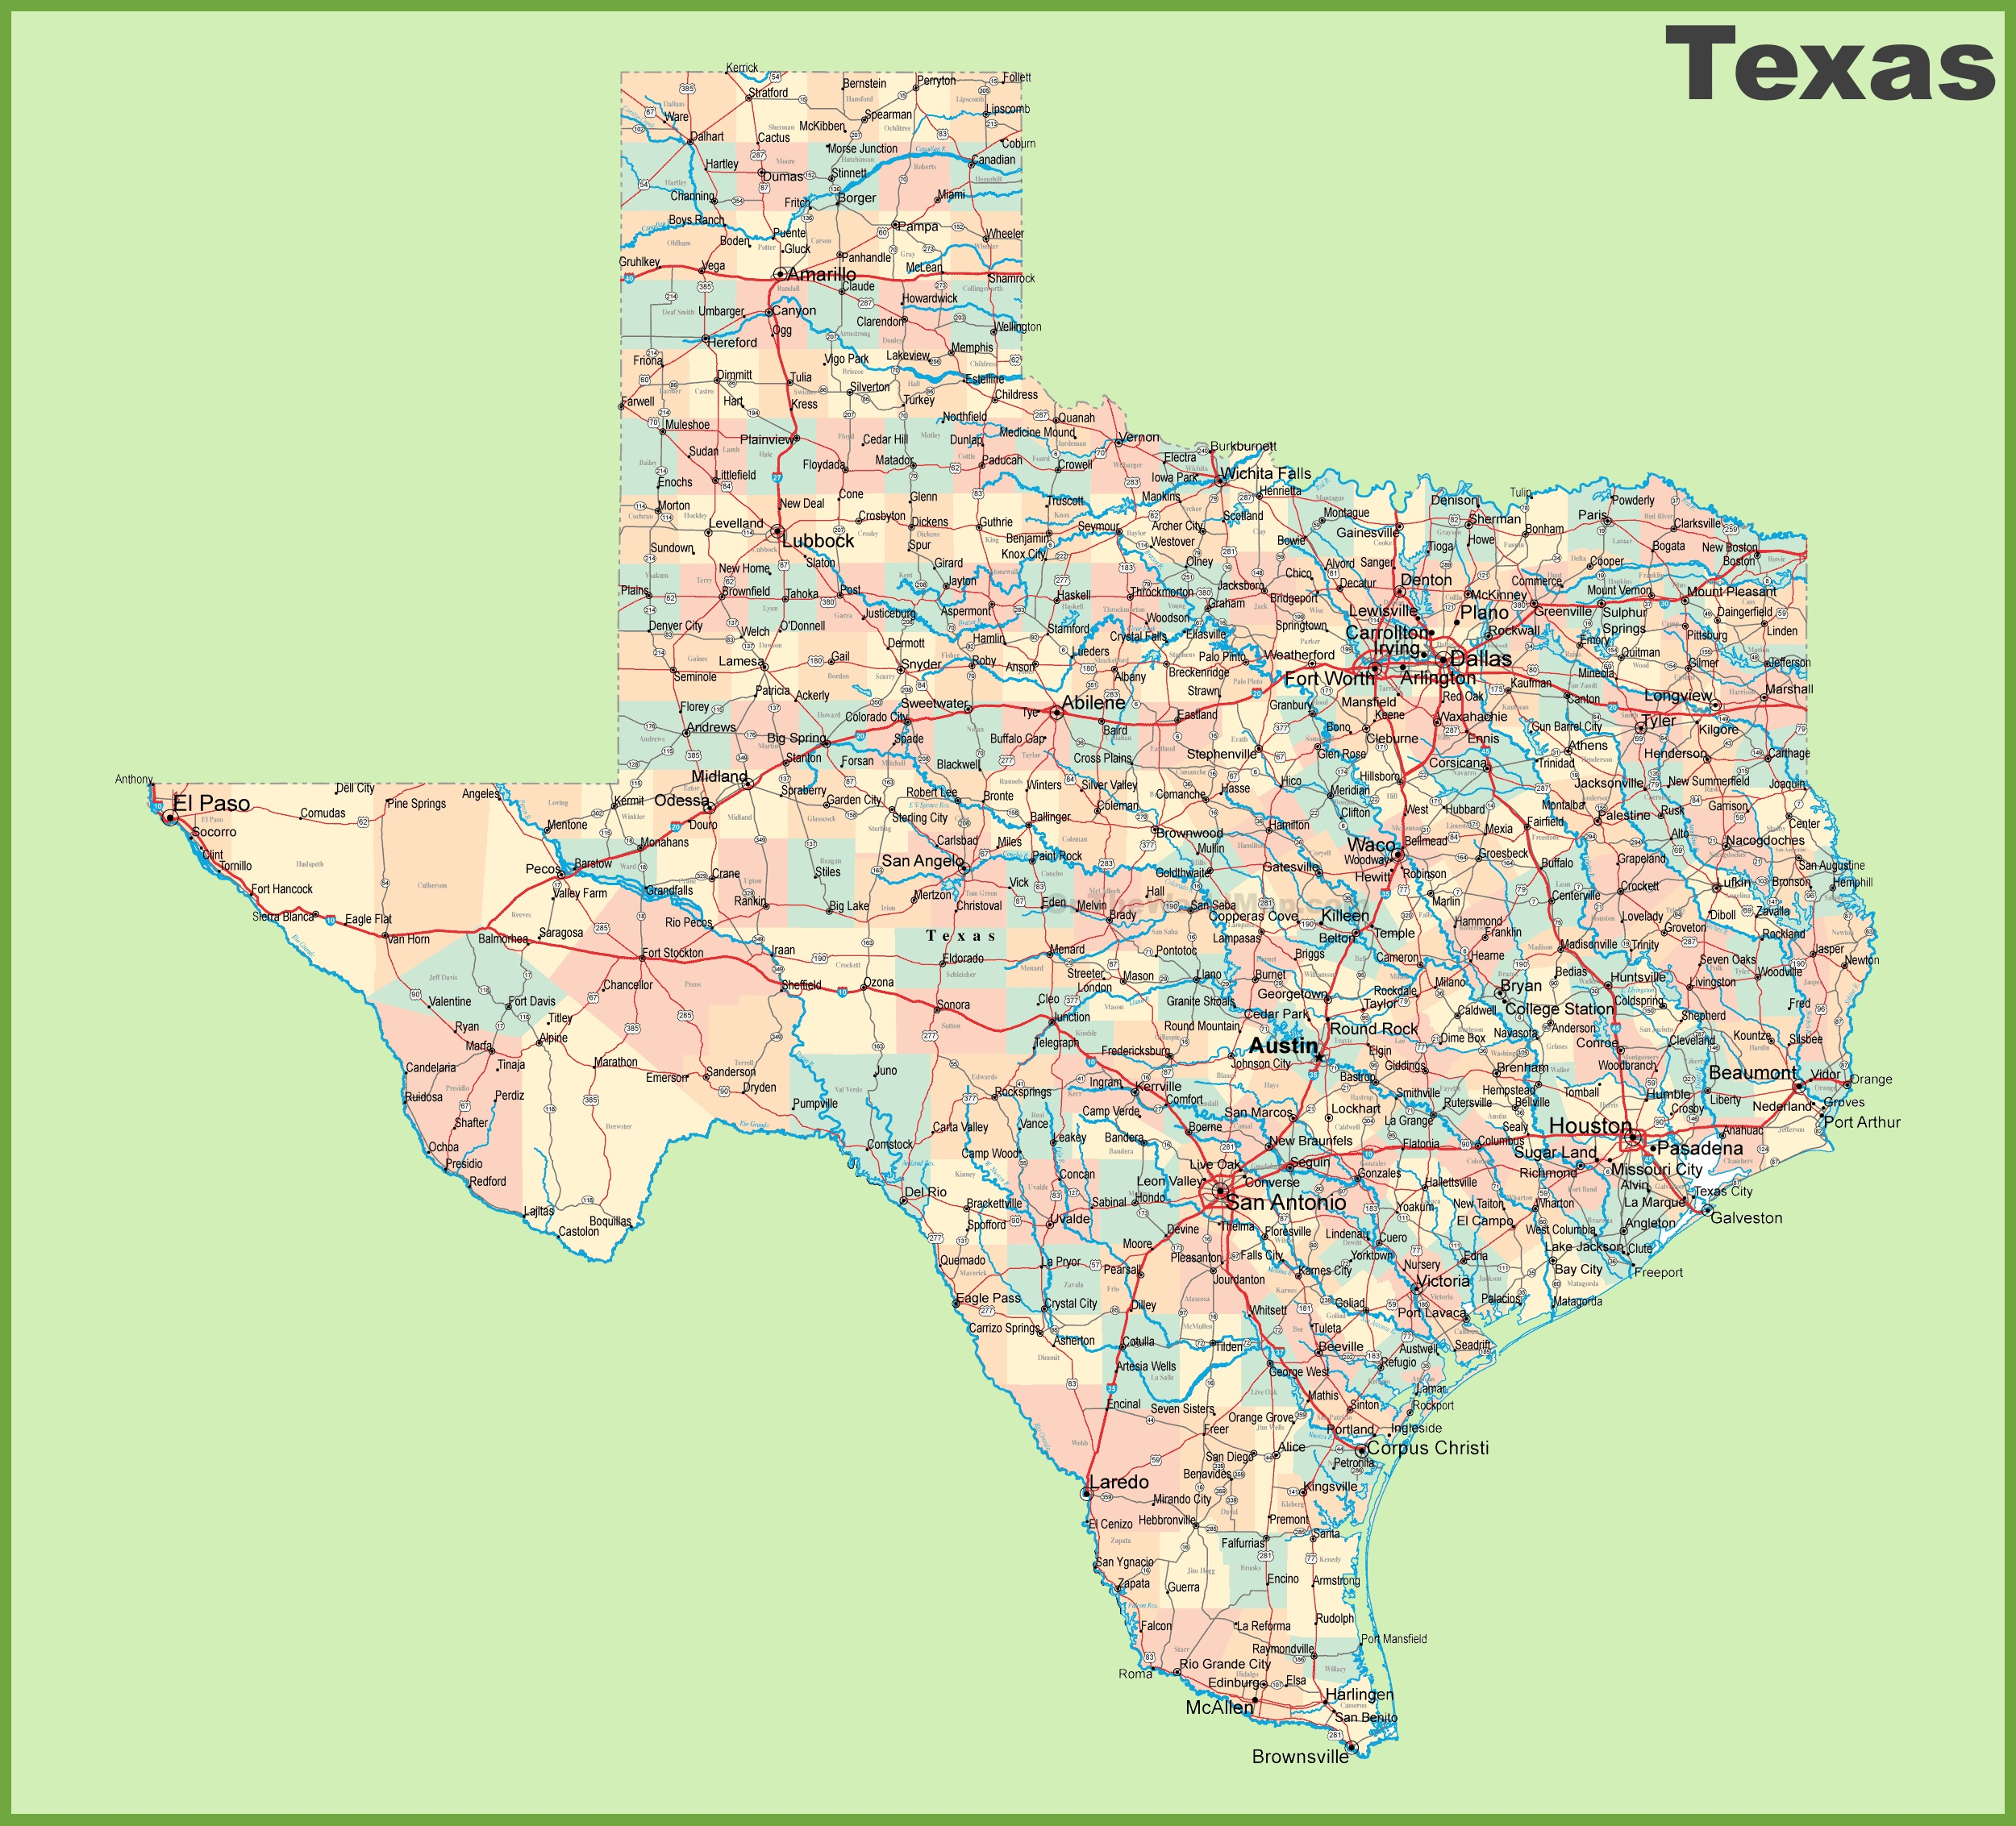 Road Map Of Texas With Cities - Texas Road Map 2017